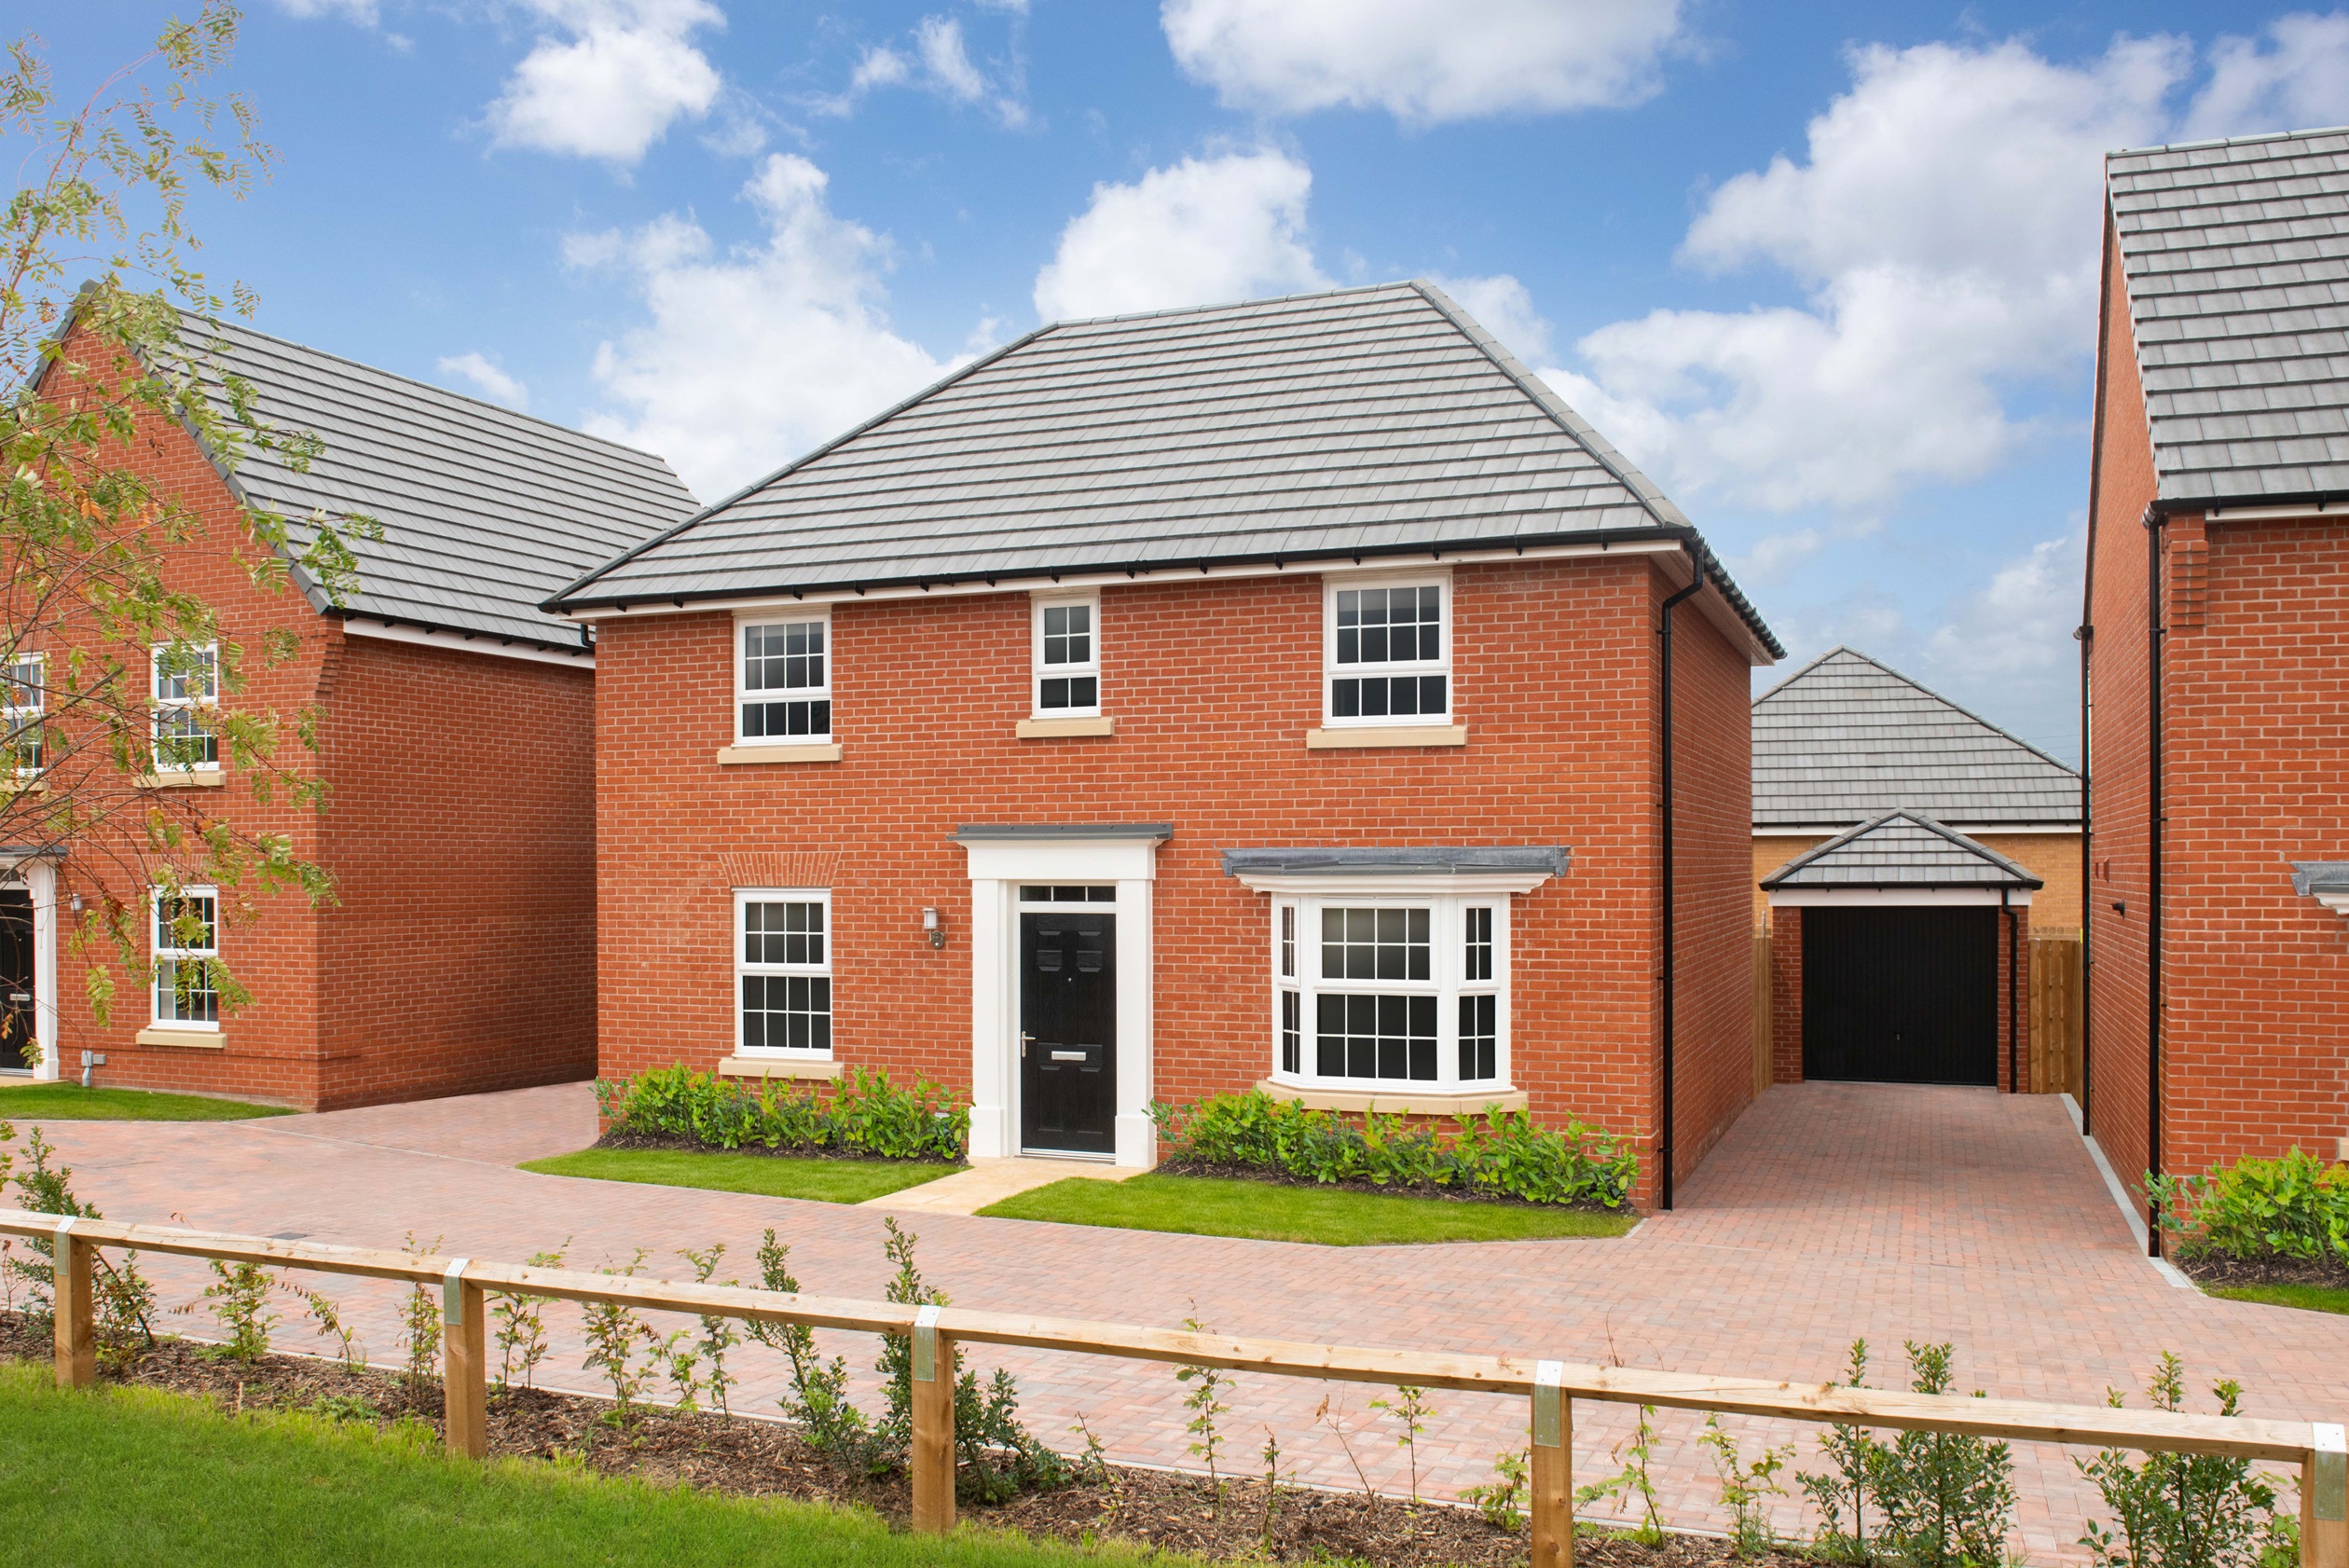 Property 1 of 10. External View Of The Four Bedroom Detached Bradgate At Gateford Manor, Worksop